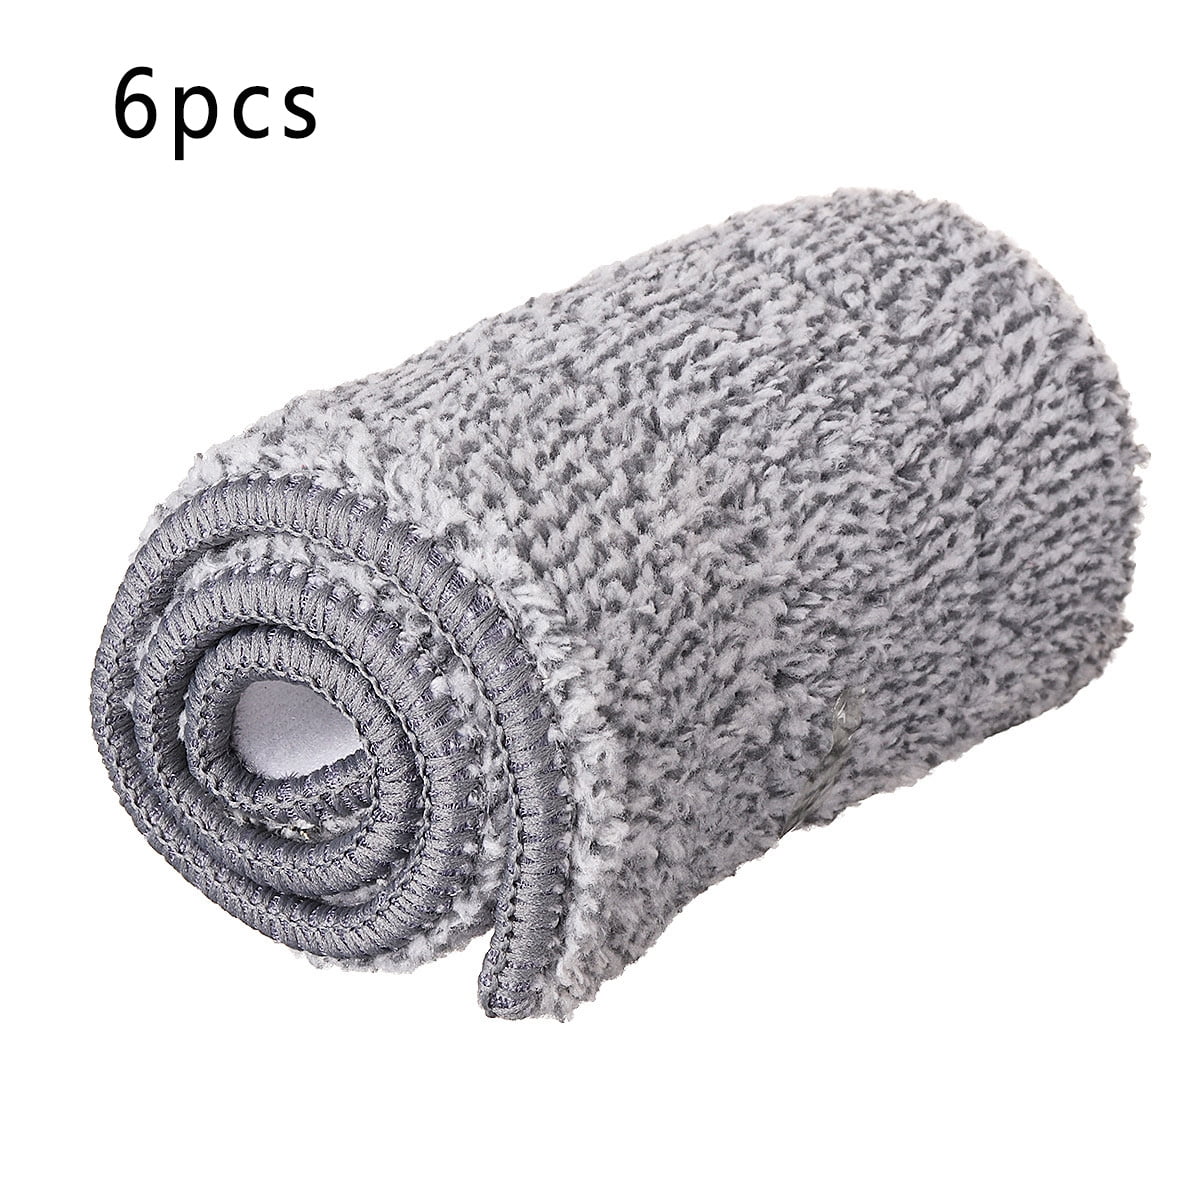 Steel wire dishcloth rag metal silver wire cleaning cloth kitchen special  non-stick oil imitation steel ball dishwashing artifact